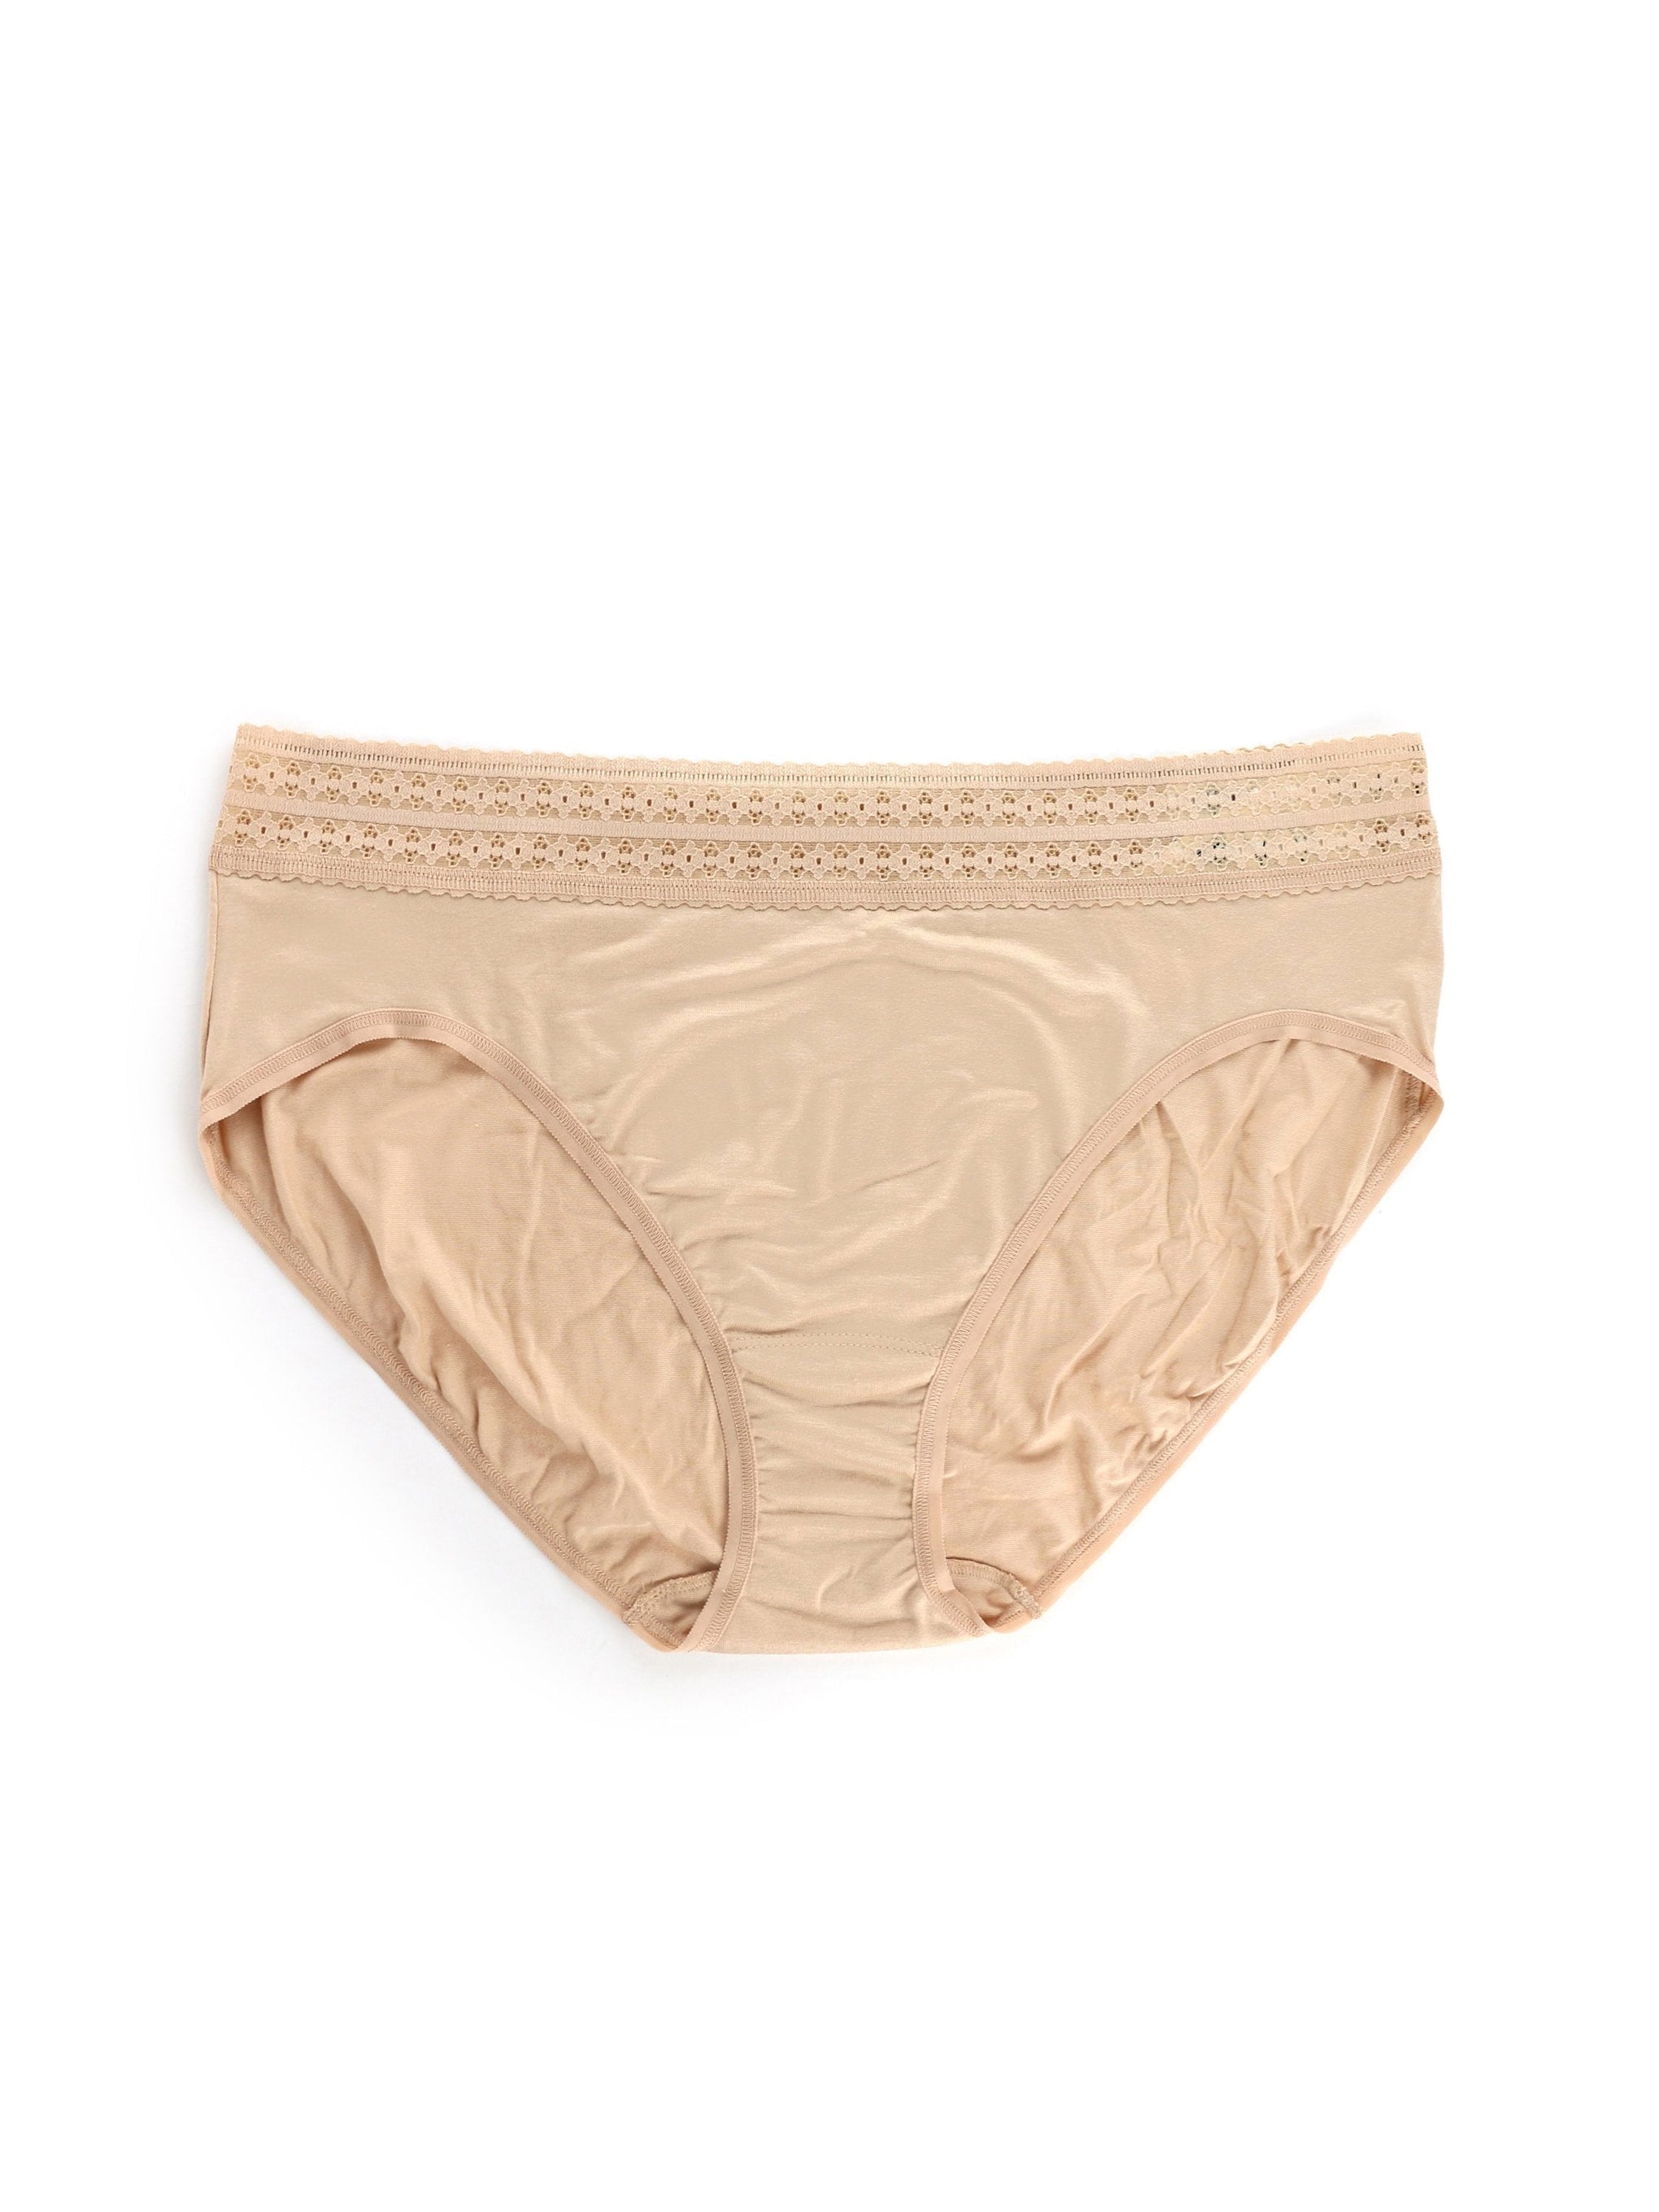 Plus Size DreamEase™ French Brief Exclusive Chai